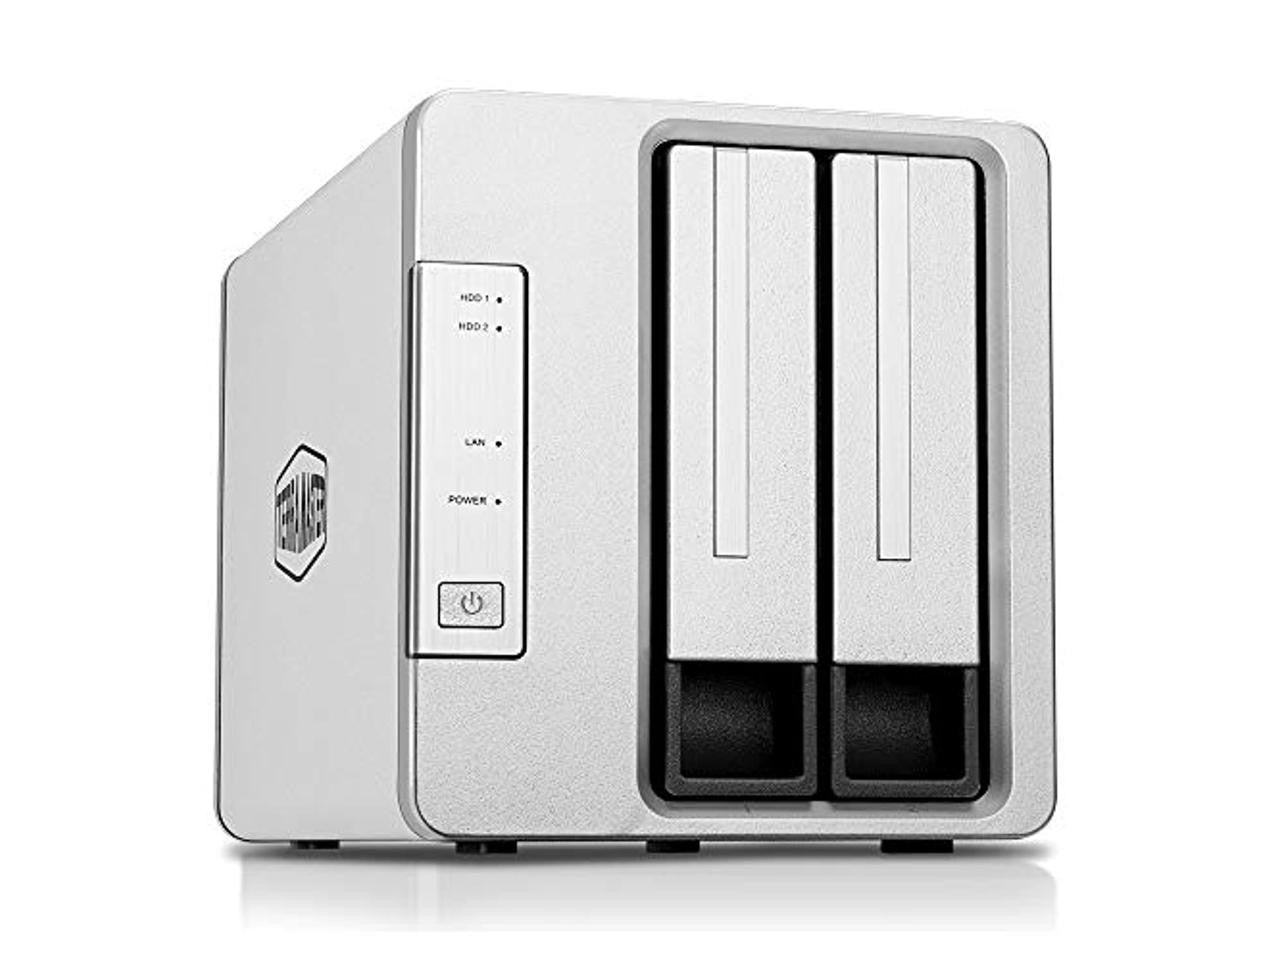 TerraMaster F2-210 2-Bay Home NAS with 6TB (2 x 3TB) of Seagate Ironwolf NAS Drives Fully Assembled and Tested